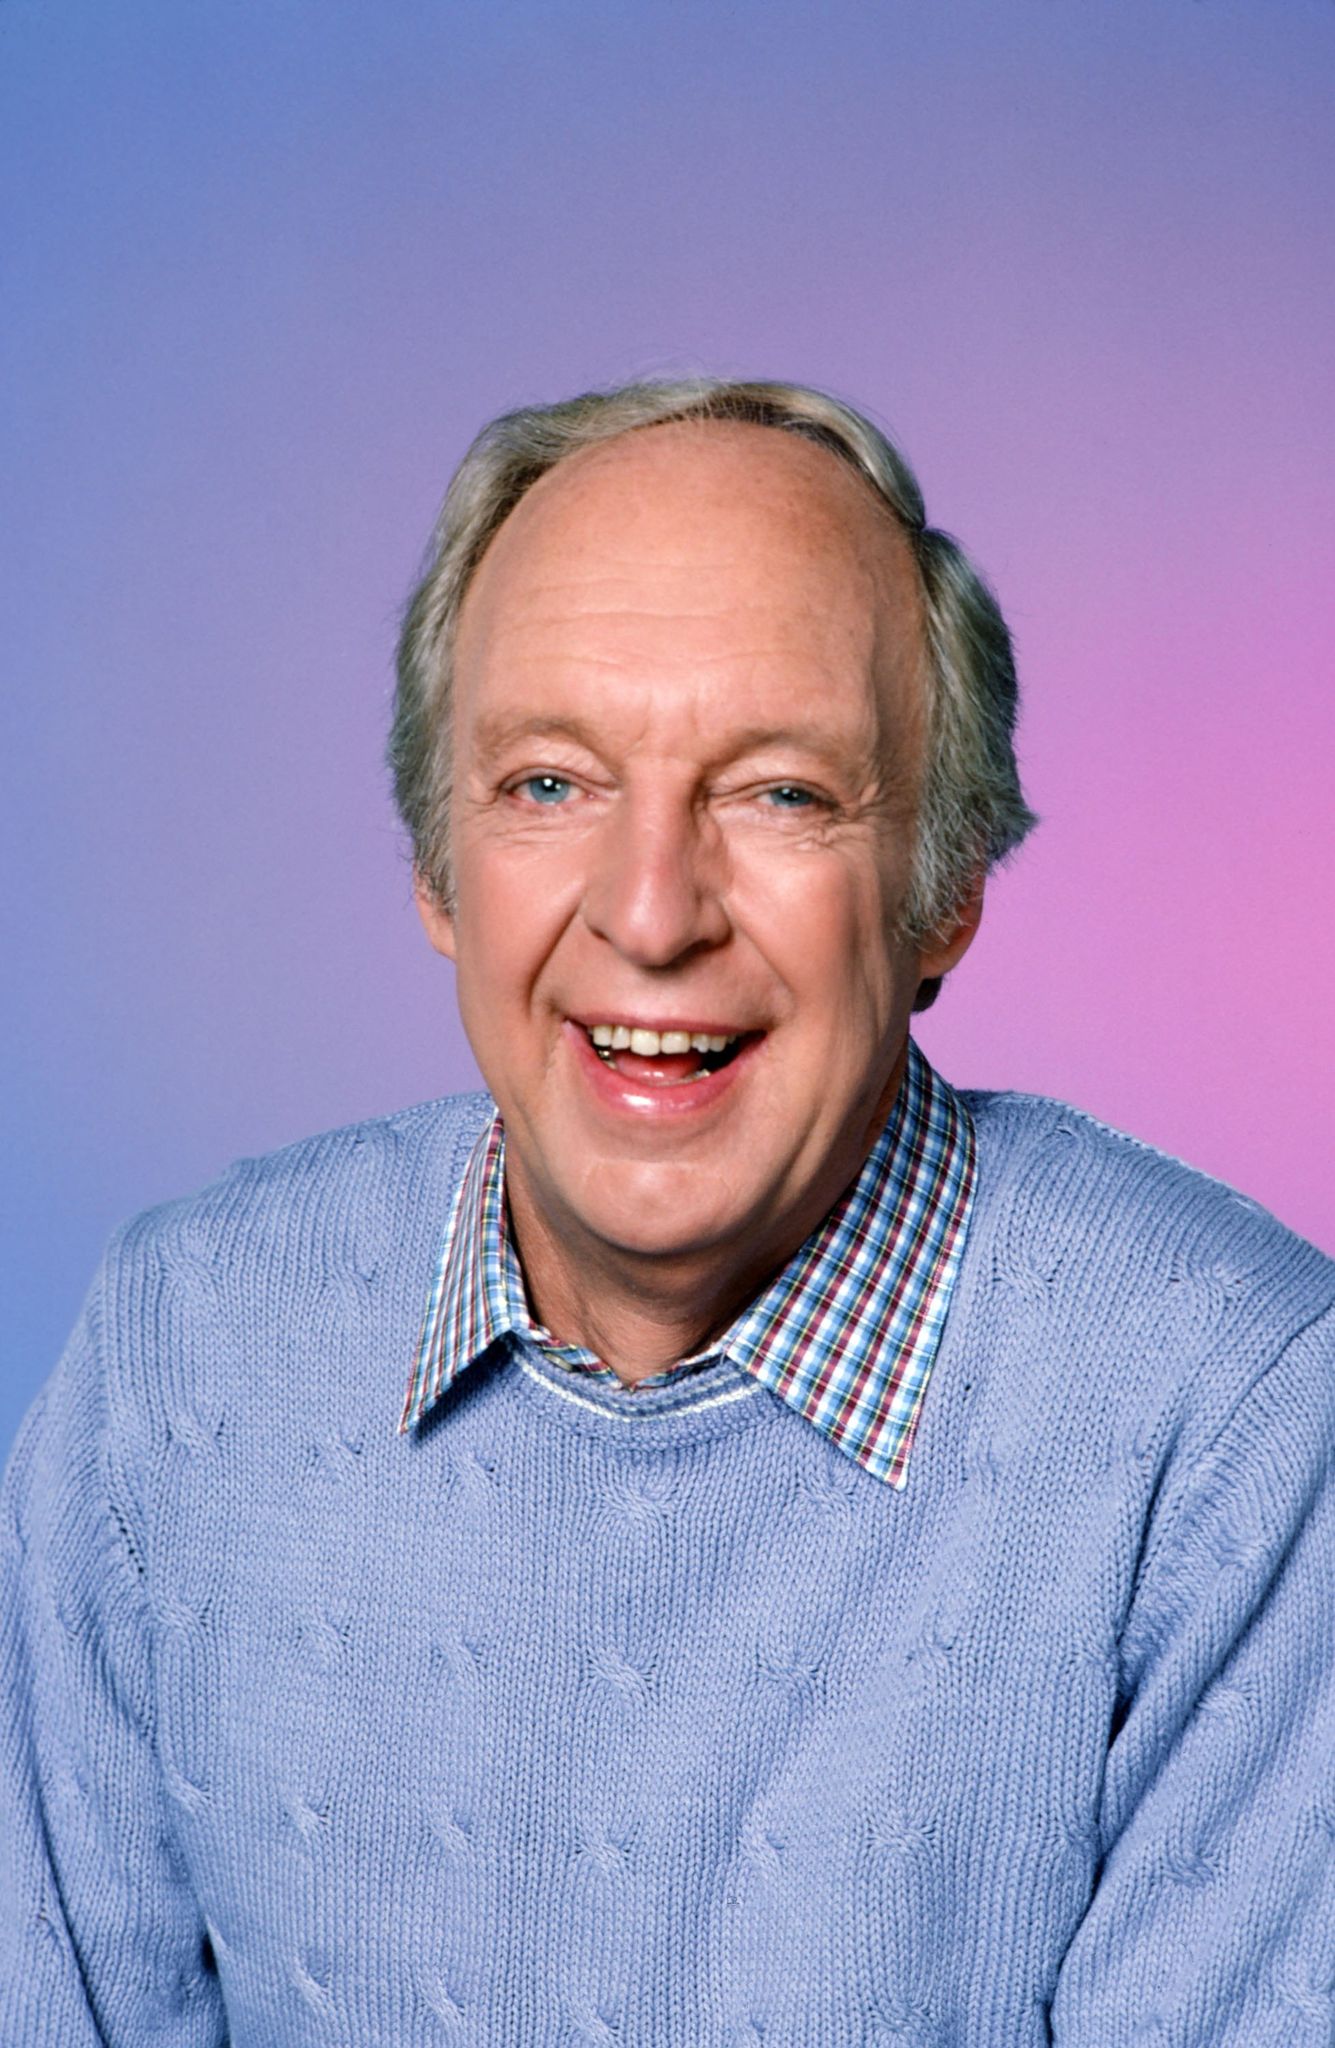 Conrad Bain pictured in 1984. | Photo: Getty Images